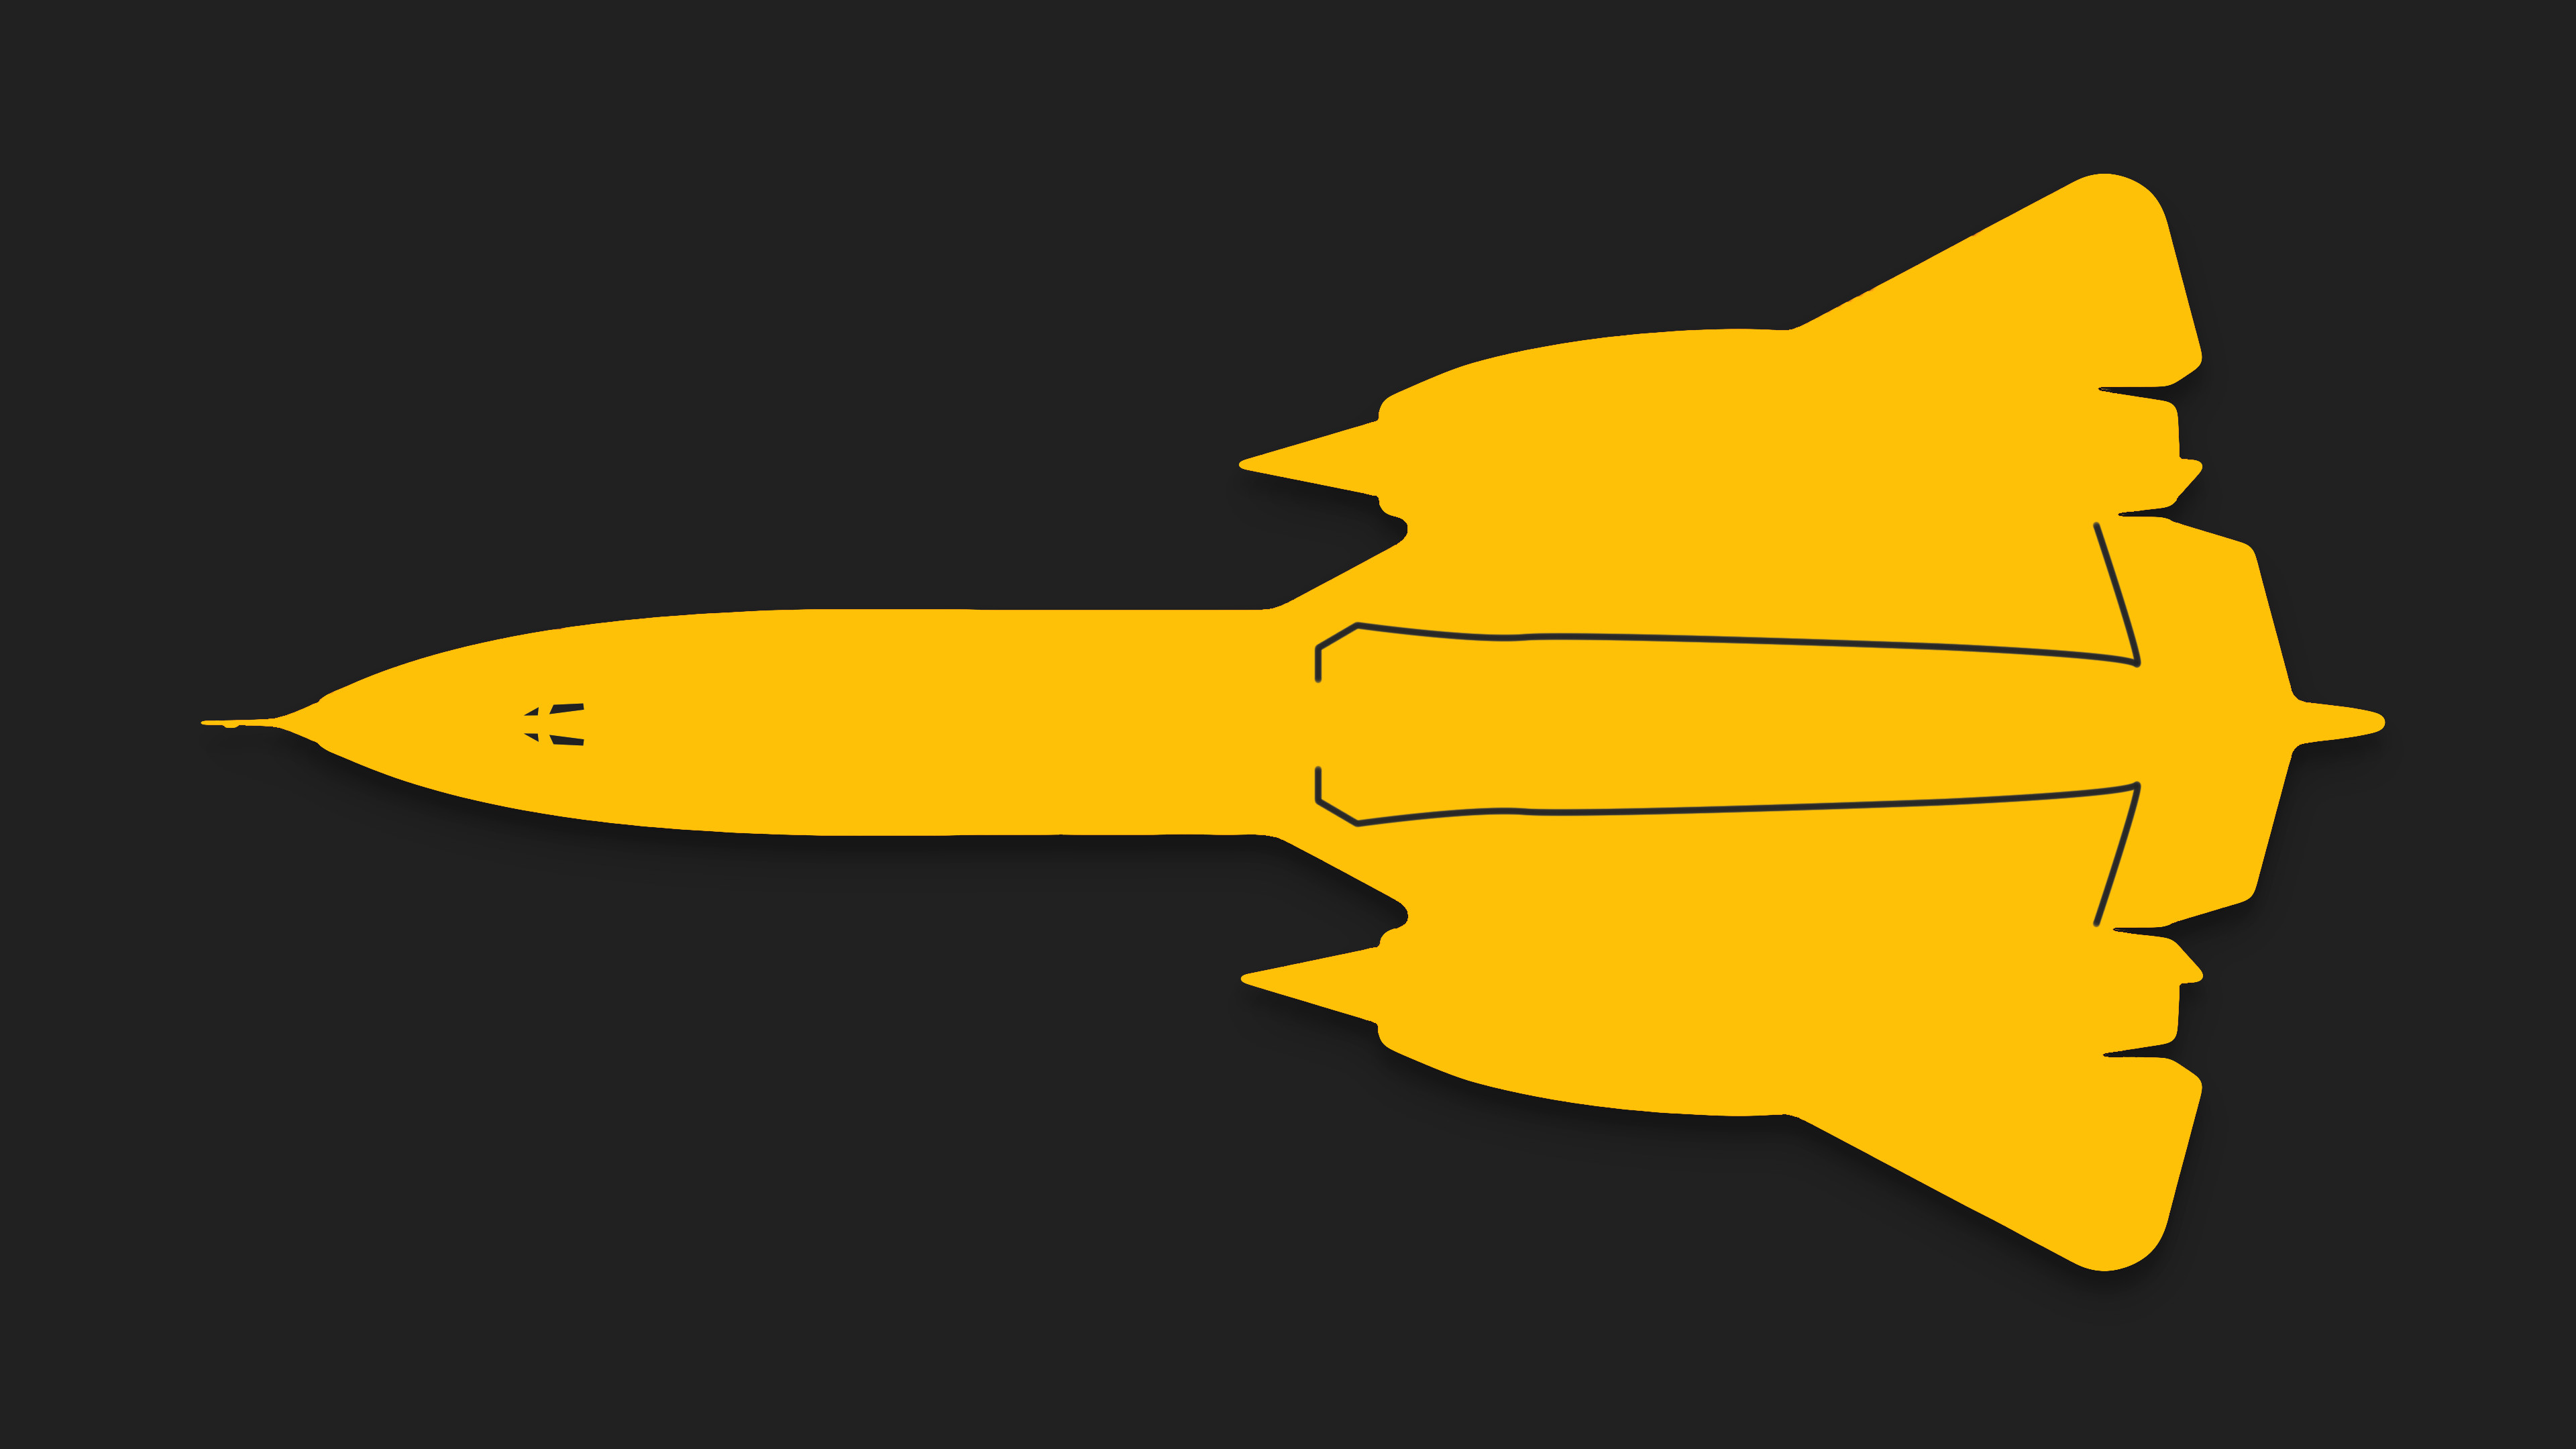 3840x2160 I made some material SR-71 Blackbird Wallpapers!